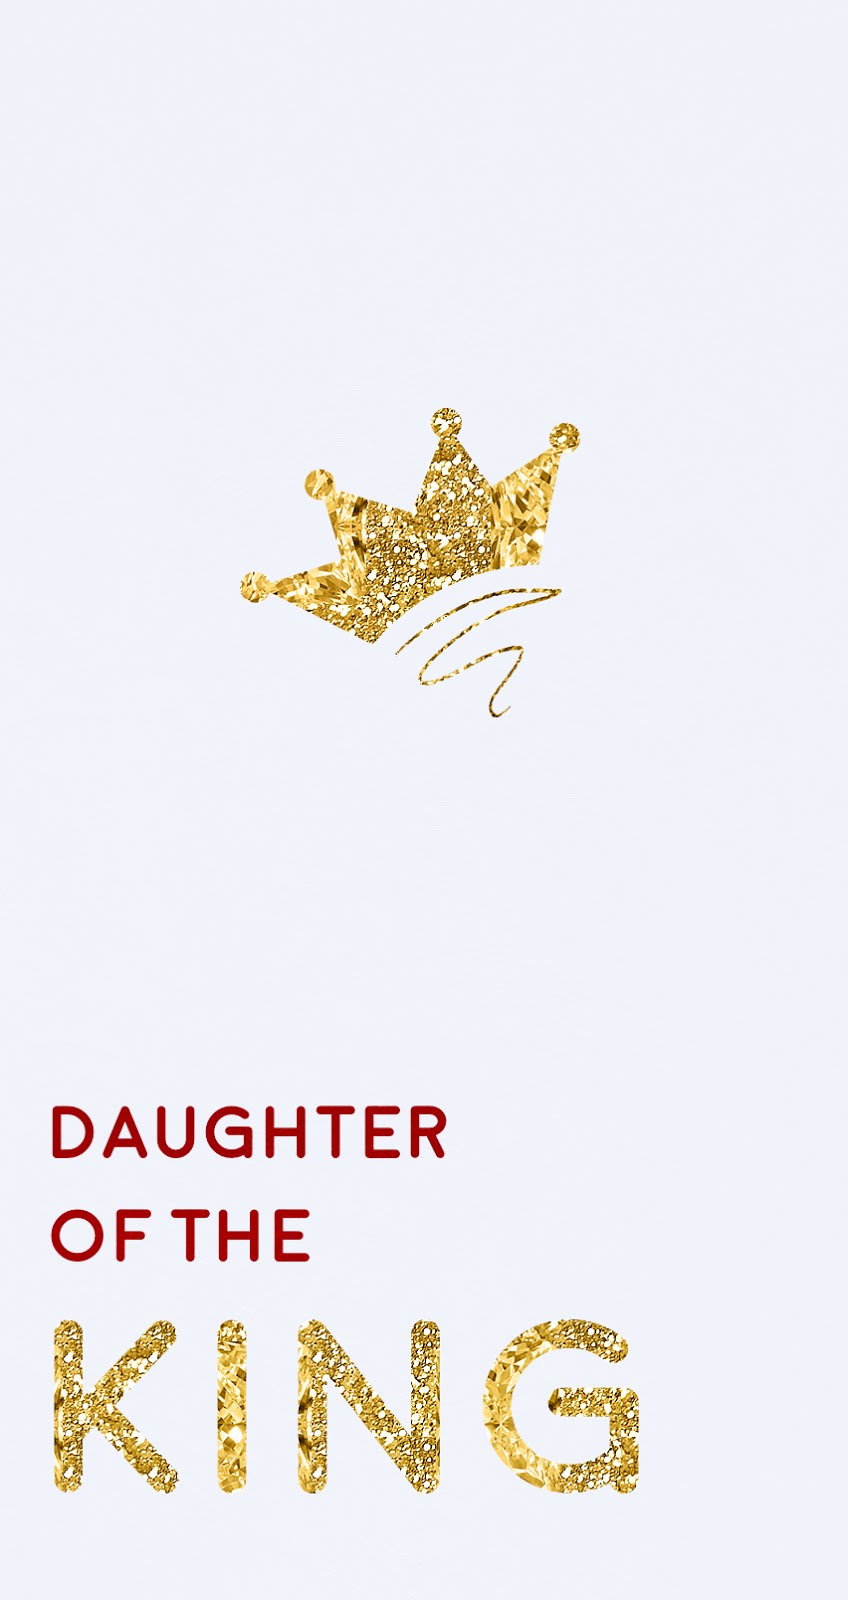 Celebrating With This Pretty And Inspiring Phone Wallpaper - Daughter Of The King Phone , HD Wallpaper & Backgrounds